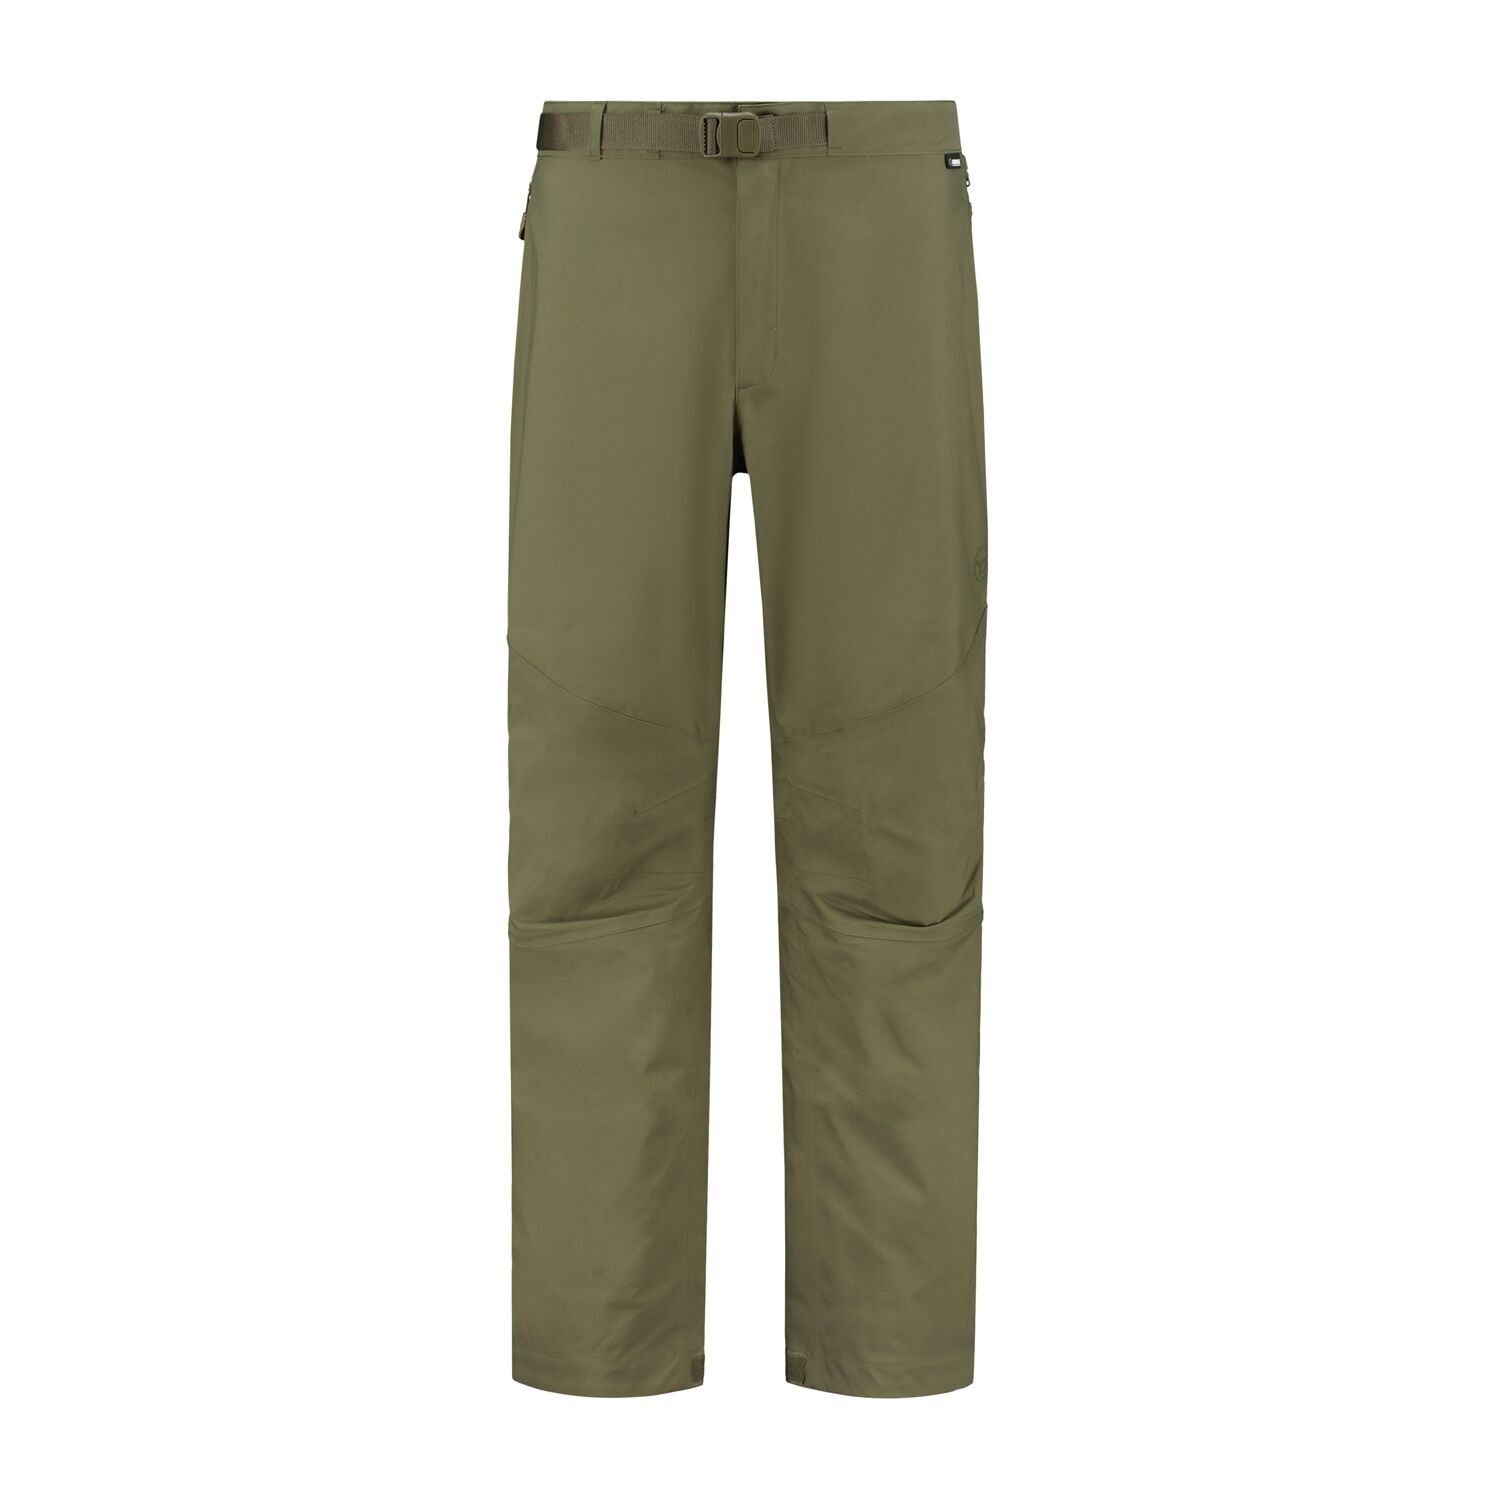 Korda Drykore Over Trousers